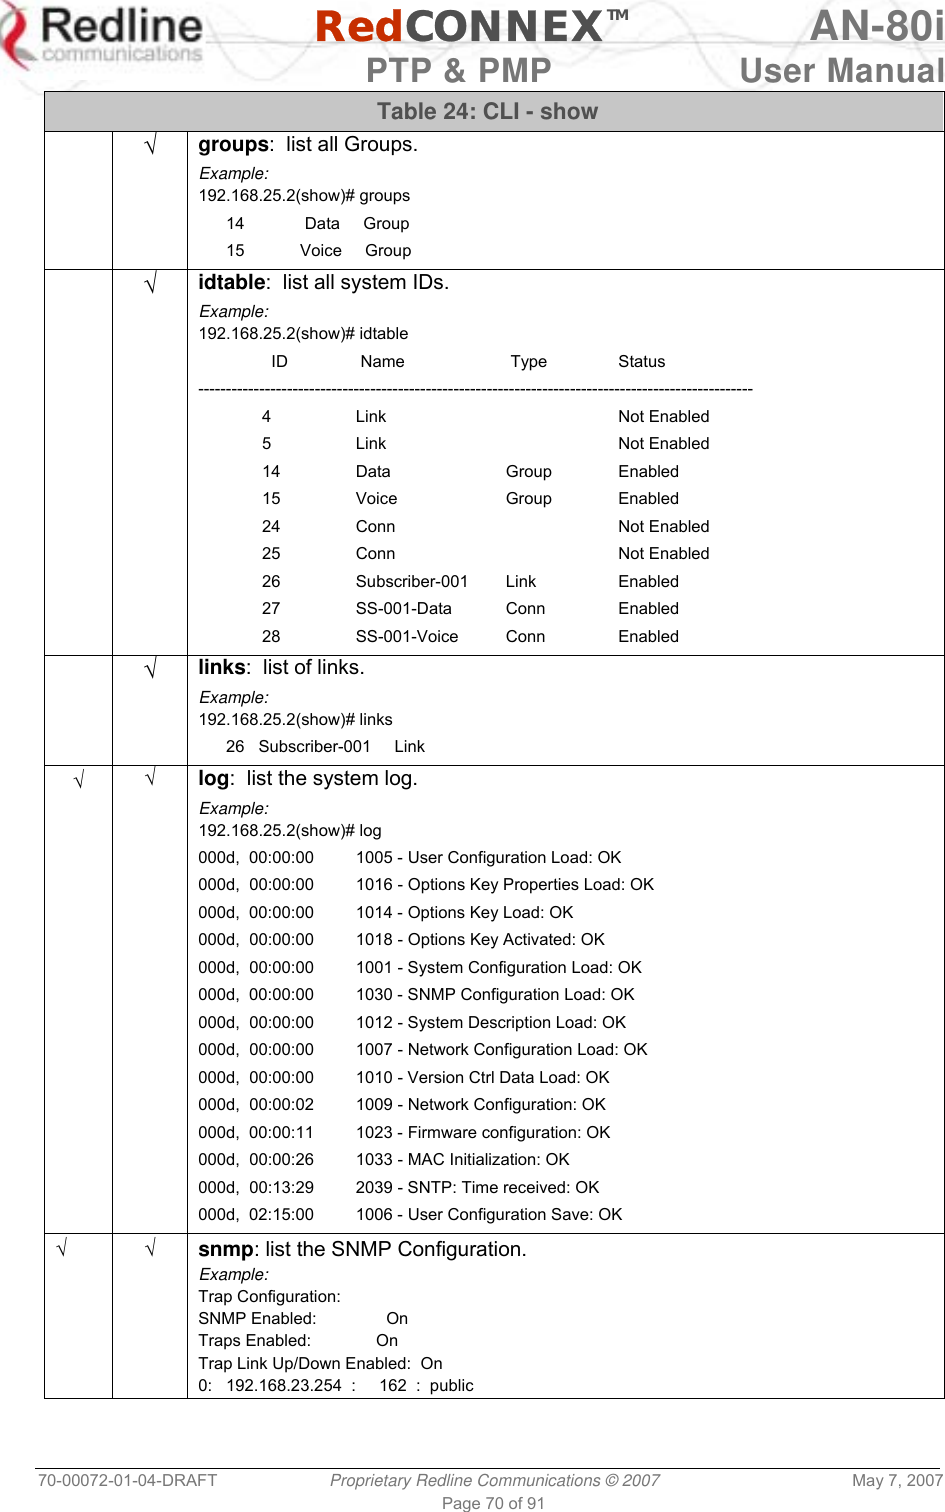   RedCONNEXTM AN-80i   PTP &amp; PMP  User Manual 70-00072-01-04-DRAFT  Proprietary Redline Communications © 2007  May 7, 2007 Page 70 of 91 Table 24: CLI - show  √ groups:  list all Groups. Example: 192.168.25.2(show)# groups       14             Data     Group       15            Voice     Group  √ idtable:  list all system IDs. Example: 192.168.25.2(show)# idtable     ID   Name   Type  Status ----------------------------------------------------------------------------------------------------  4  Link    Not Enabled  5  Link    Not Enabled  14  Data  Group  Enabled  15  Voice  Group  Enabled  24  Conn    Not Enabled  25  Conn    Not Enabled  26  Subscriber-001 Link  Enabled  27  SS-001-Data Conn  Enabled  28  SS-001-Voice Conn  Enabled  √ links:  list of links. Example: 192.168.25.2(show)# links       26   Subscriber-001     Link √ √ log:  list the system log. Example: 192.168.25.2(show)# log 000d,  00:00:00         1005 - User Configuration Load: OK 000d,  00:00:00         1016 - Options Key Properties Load: OK 000d,  00:00:00         1014 - Options Key Load: OK 000d,  00:00:00         1018 - Options Key Activated: OK 000d,  00:00:00         1001 - System Configuration Load: OK 000d,  00:00:00         1030 - SNMP Configuration Load: OK 000d,  00:00:00         1012 - System Description Load: OK 000d,  00:00:00         1007 - Network Configuration Load: OK 000d,  00:00:00         1010 - Version Ctrl Data Load: OK 000d,  00:00:02         1009 - Network Configuration: OK 000d,  00:00:11         1023 - Firmware configuration: OK 000d,  00:00:26         1033 - MAC Initialization: OK 000d,  00:13:29         2039 - SNTP: Time received: OK 000d,  02:15:00         1006 - User Configuration Save: OK √ √ snmp: list the SNMP Configuration. Example: Trap Configuration: SNMP Enabled:               On Traps Enabled:              On Trap Link Up/Down Enabled:  On 0:   192.168.23.254  :     162  :  public 